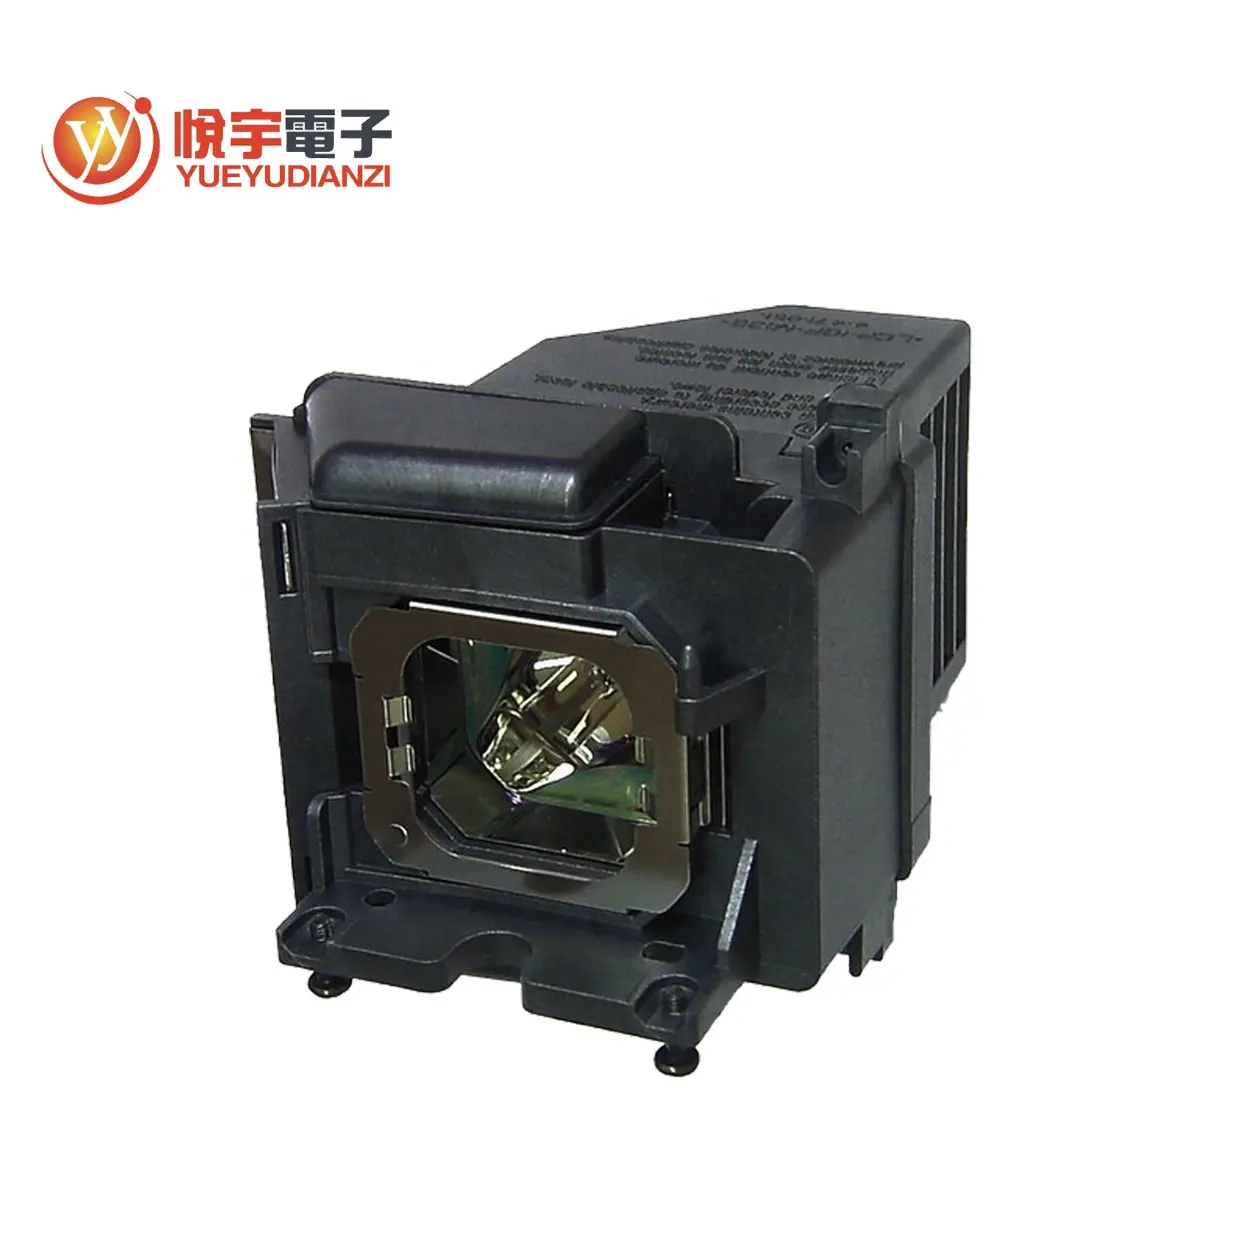 Wholesale LMP-H220 projector lamp module for SONY VPL-VW260ES VPL-VW285ES projector lamps replacement